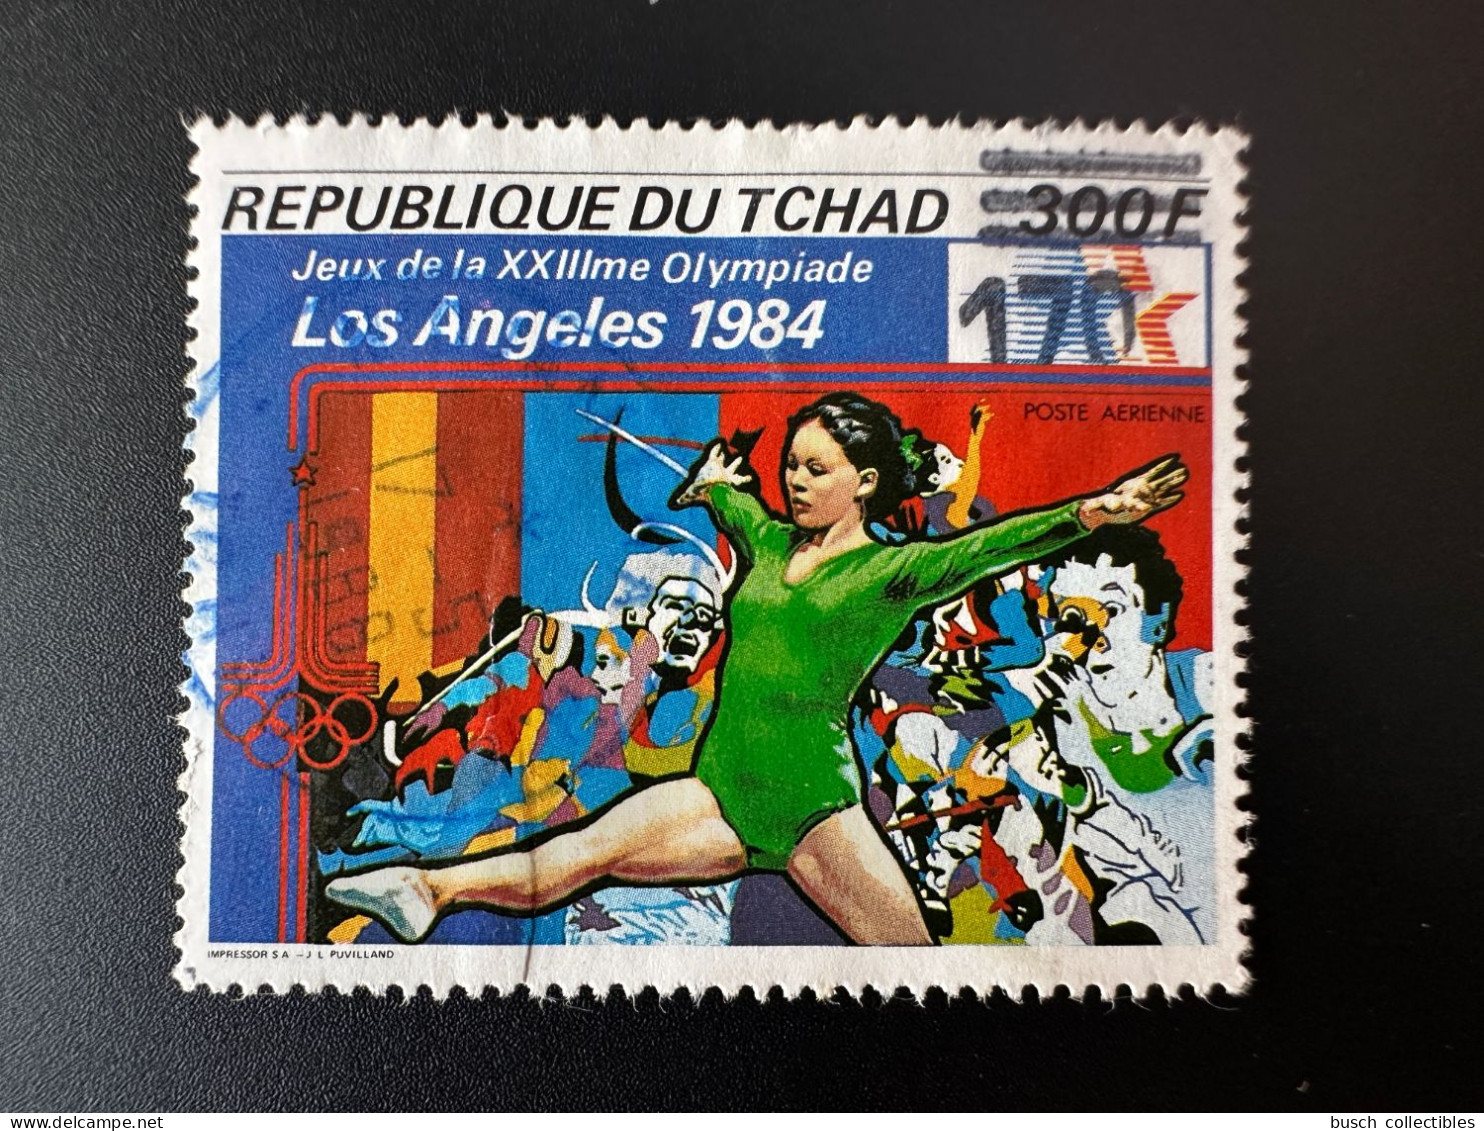 Tchad Chad Tschad 1987 / 1988 Mi. 1149 Oblitéré Used Surchargé Overprint Olympic Games Jeux Olympiques Los Angeles 1984 - Ciad (1960-...)